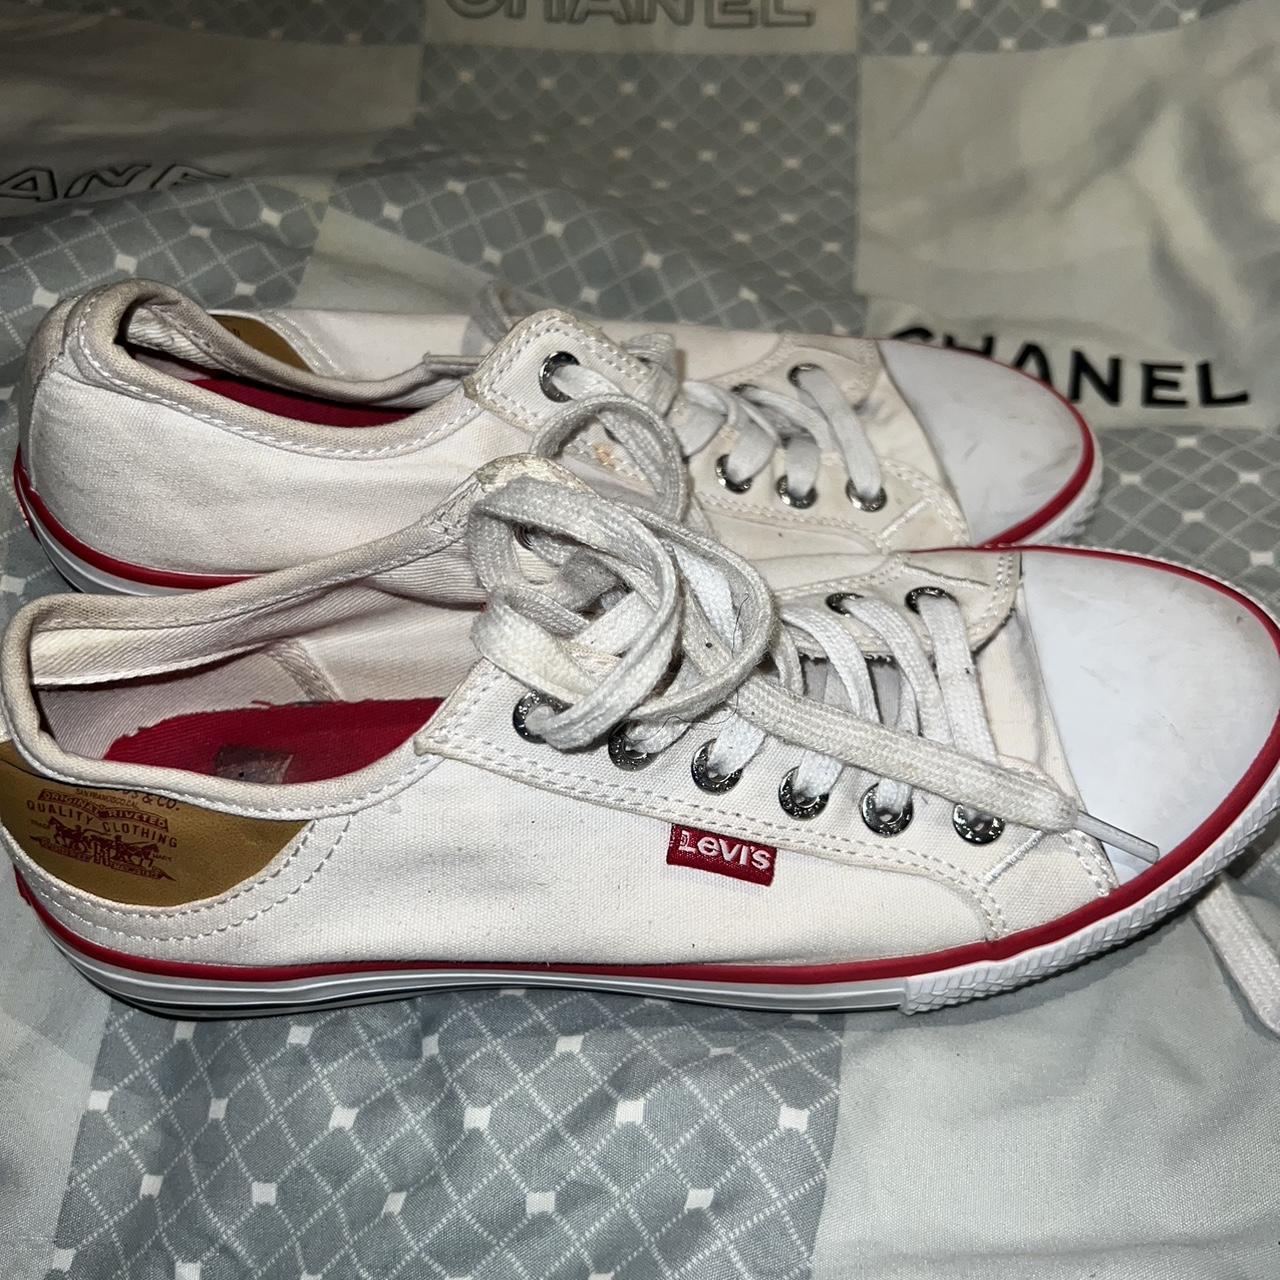 Levi's Women's White and Tan Trainers | Depop